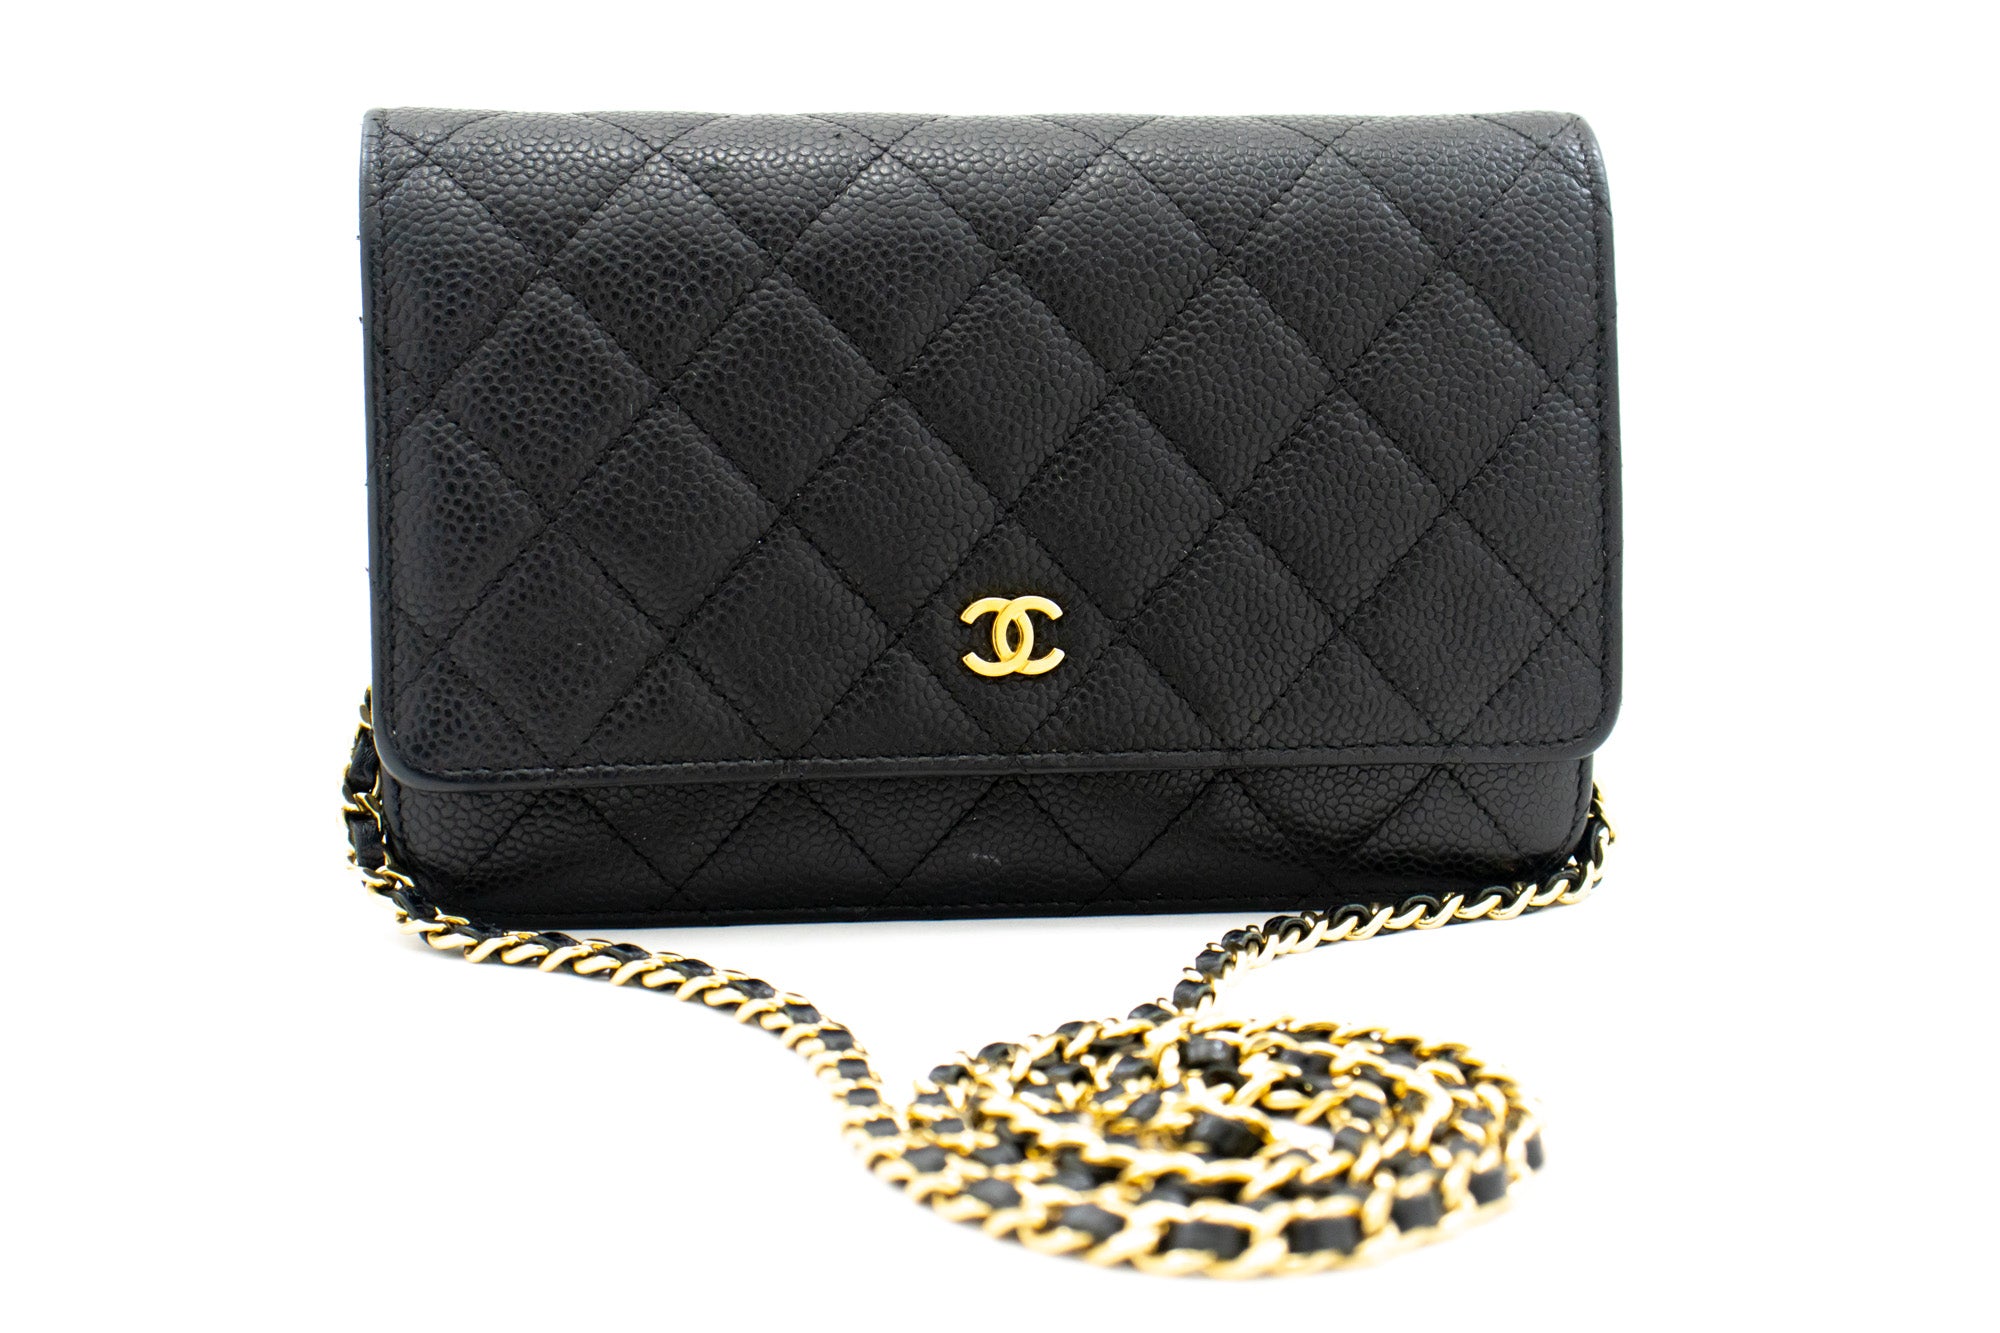 Authentic Chanel Black Caviar Quilted Leather Phone Bag on Chain Crossbody Bag